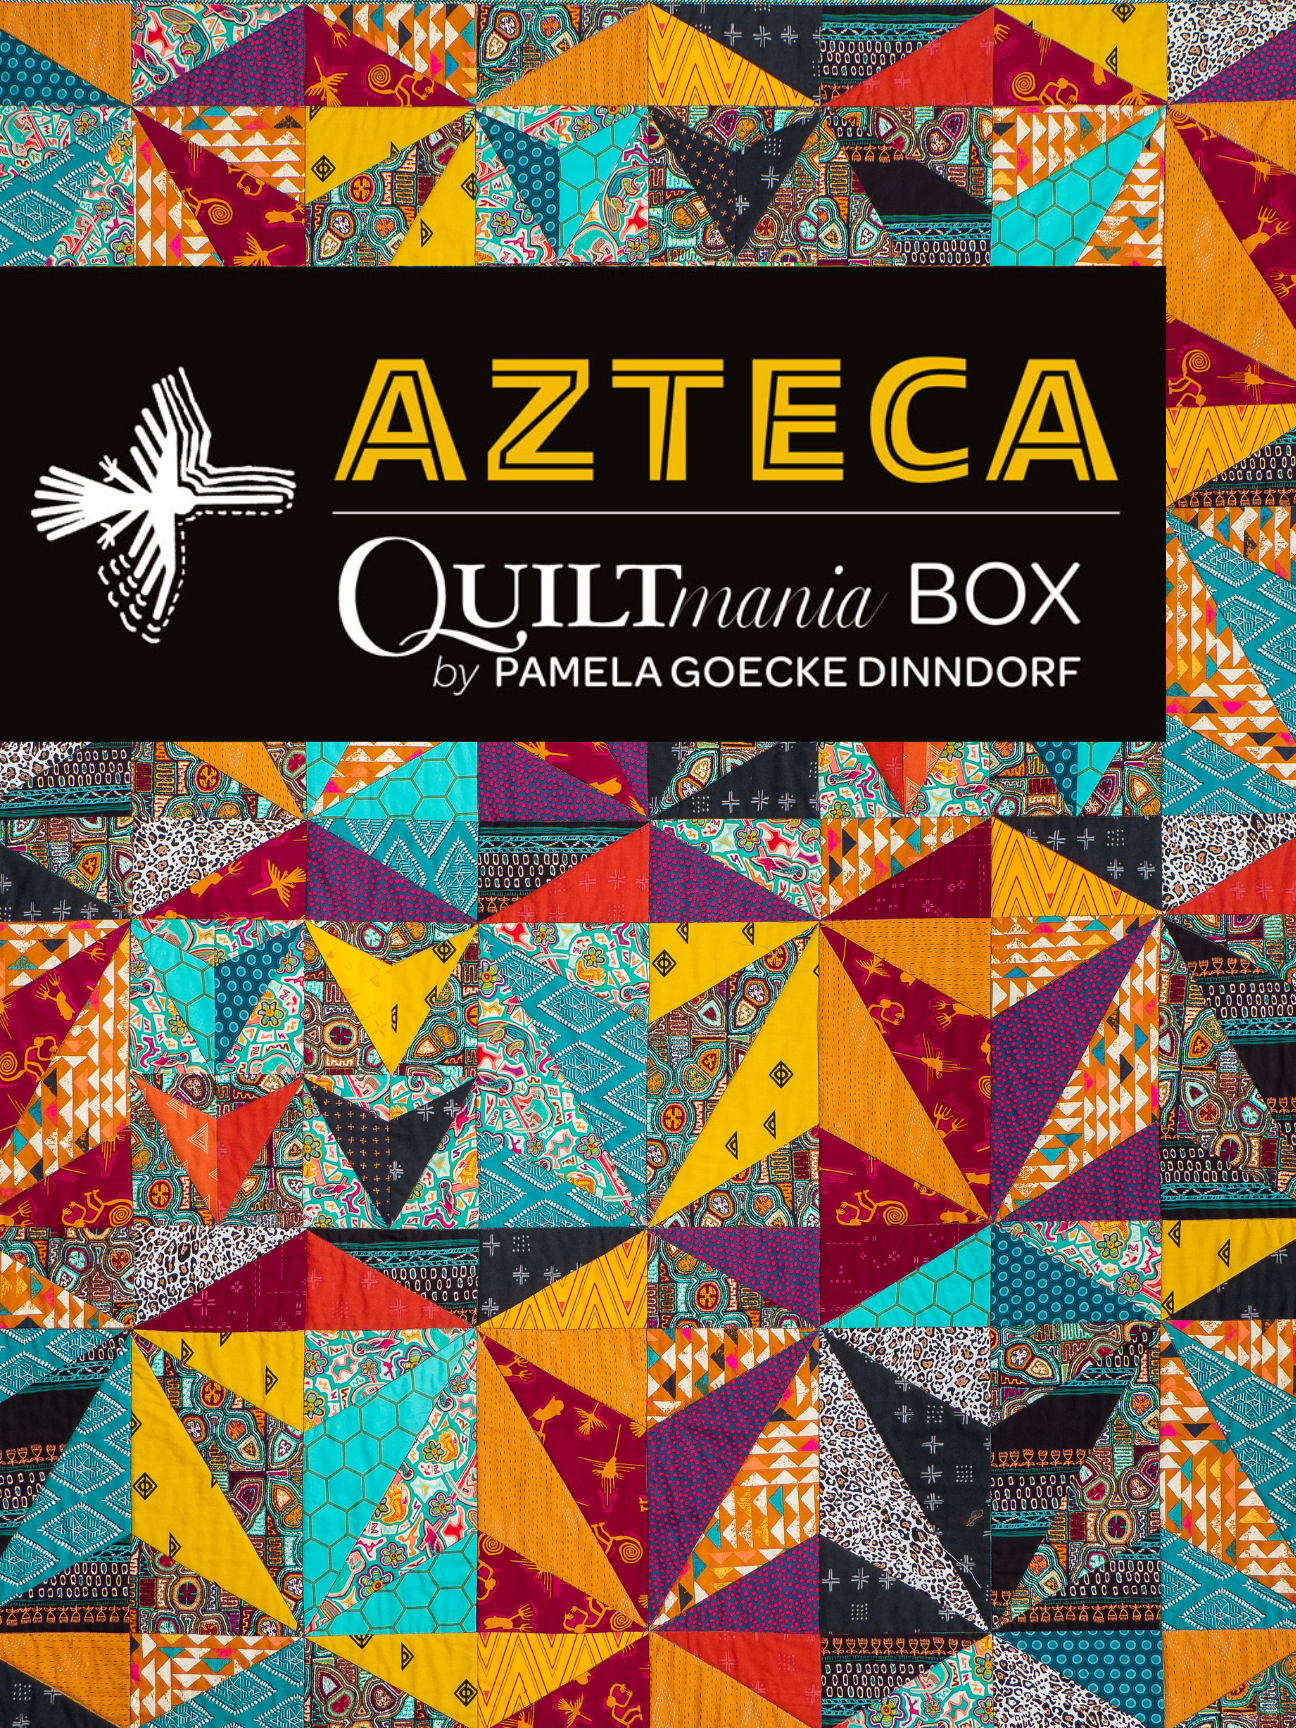 Traditional Quilt Books  Classic patterns, high quality press- Page 2 of 4  - Quiltmania